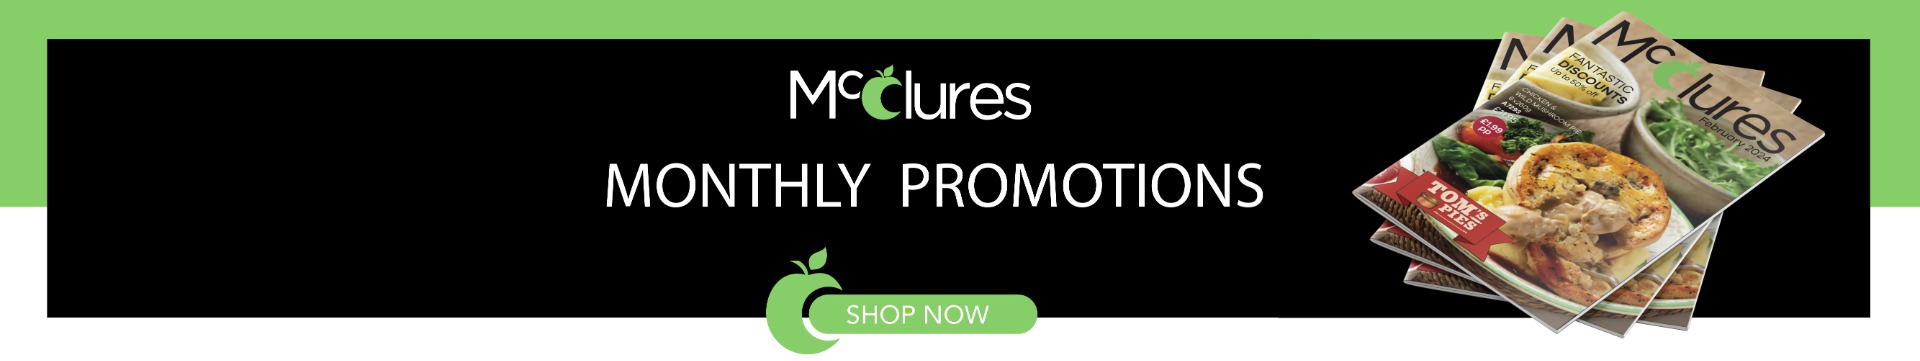 monthly_promotions_banner_February_copy_2